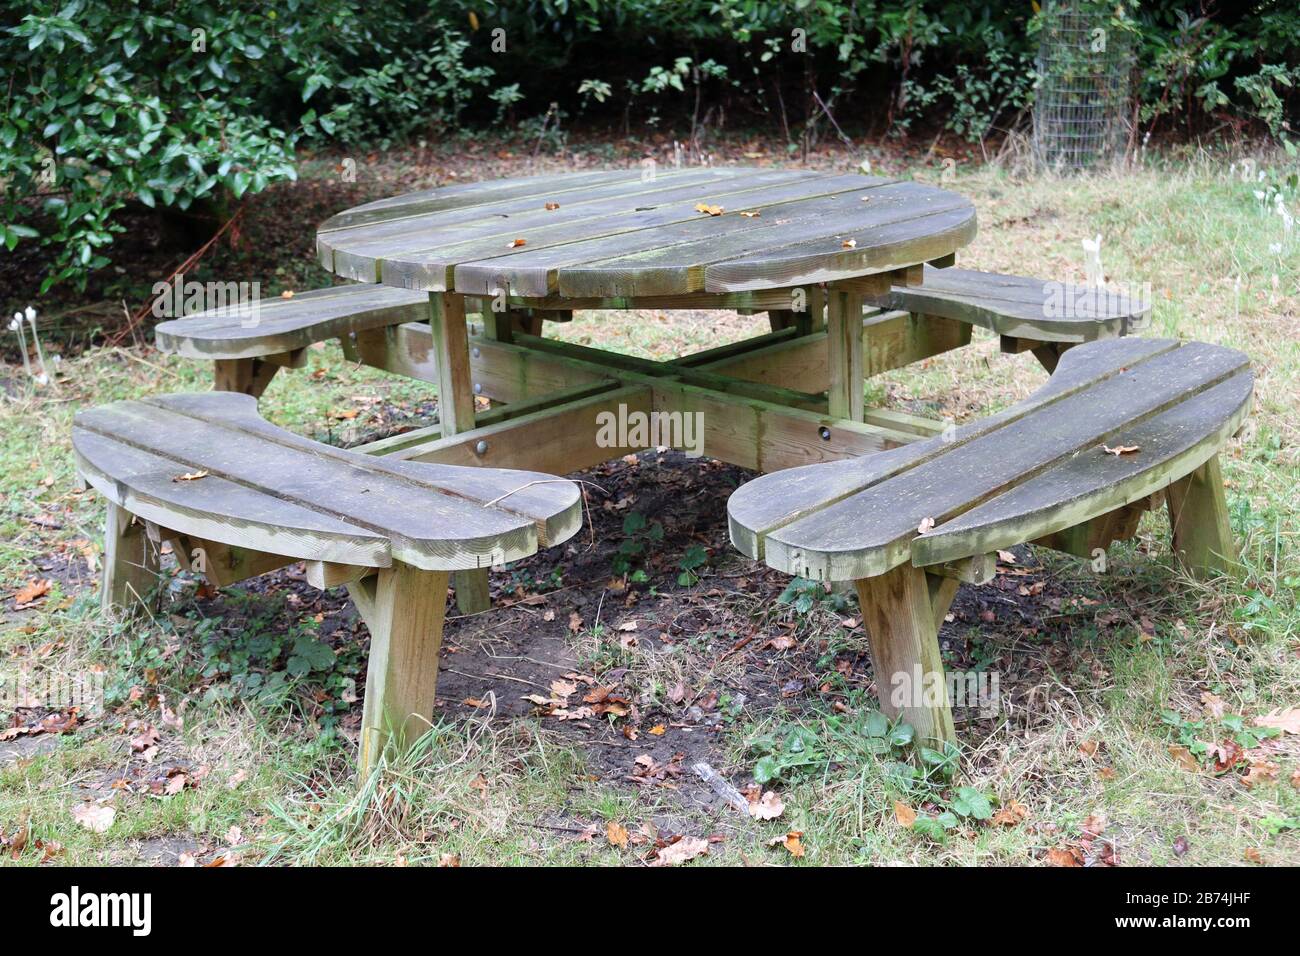 Round wooden picnic table with rounded seats on grass with soil underneath and shrubs in the background. Stock Photo